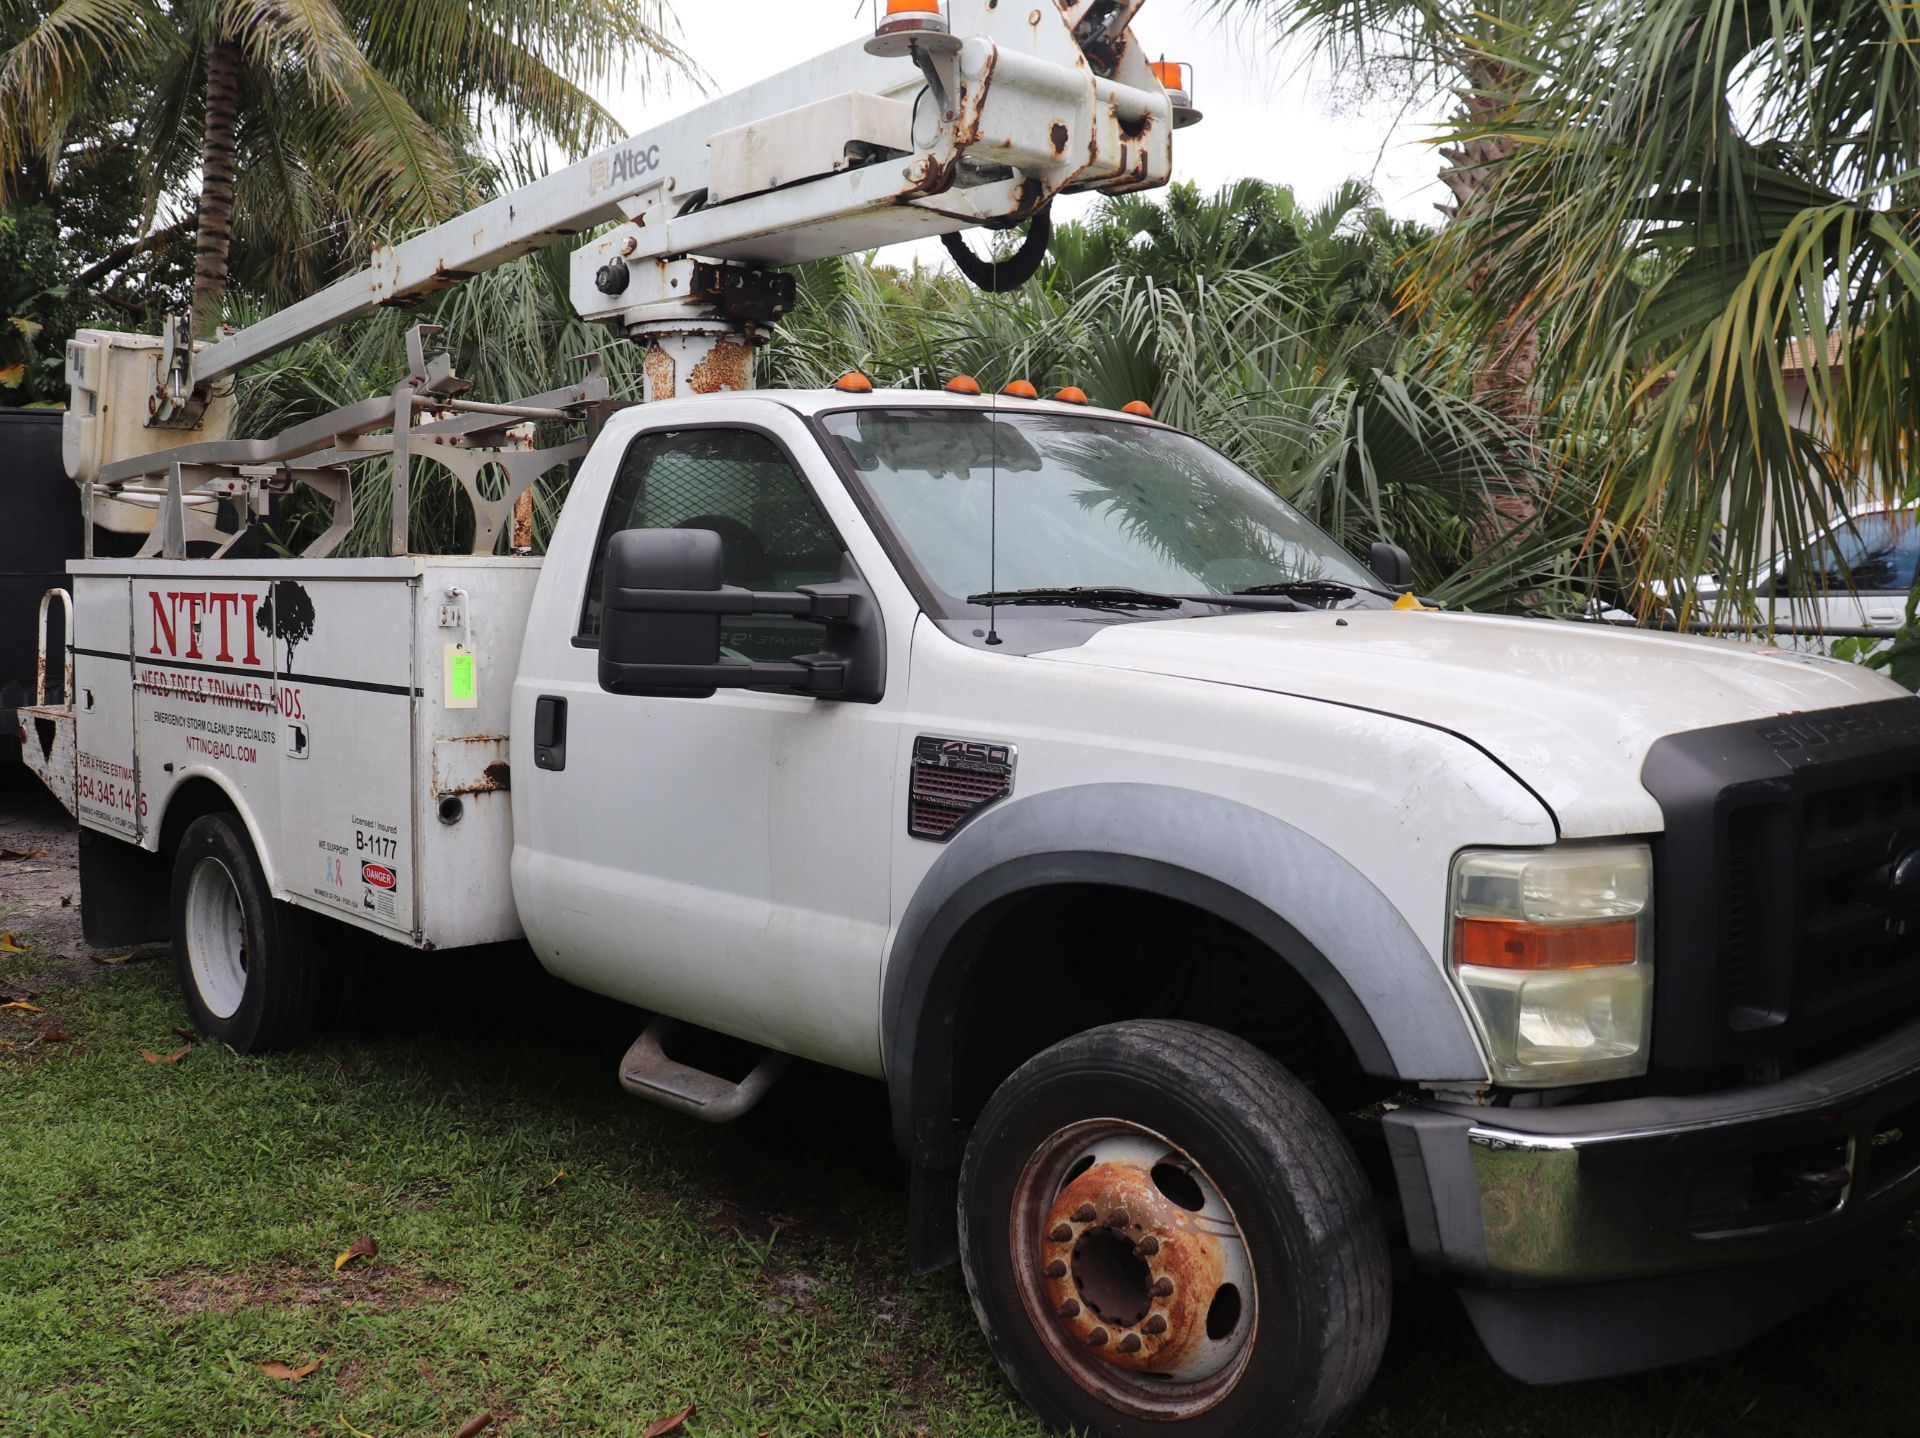 2008 Ford F-450 Vin: 1FDXF46R08ED87086 With Altec telescoping lift